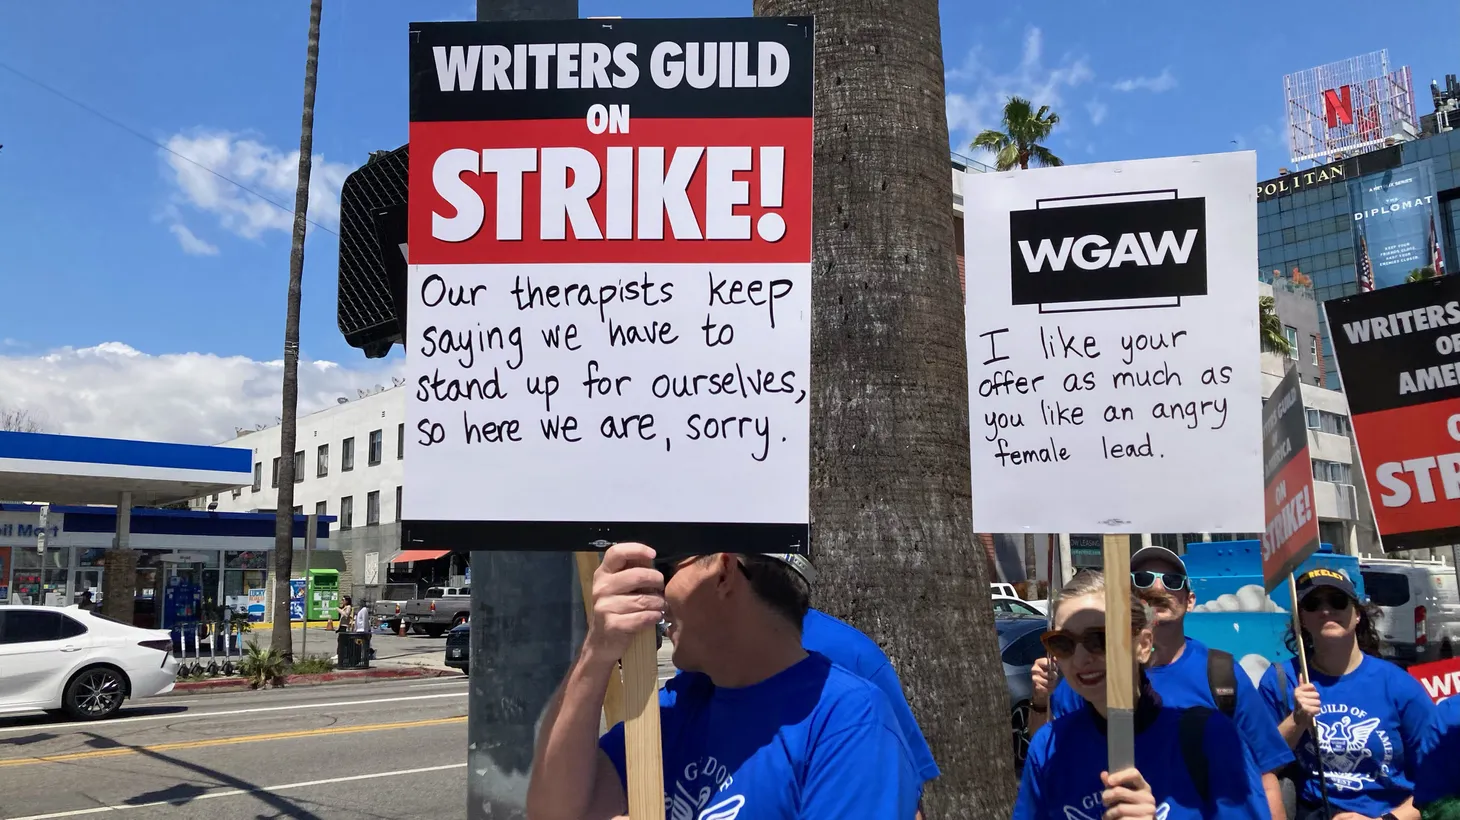 Hollywood writers on strike carry signs that say, “Our therapists keep saying we have to stand up for ourselves, so here we are, sorry,” and “I like your offer as much as I like an angry female lead,” May 2, 2023 in Los Angeles.